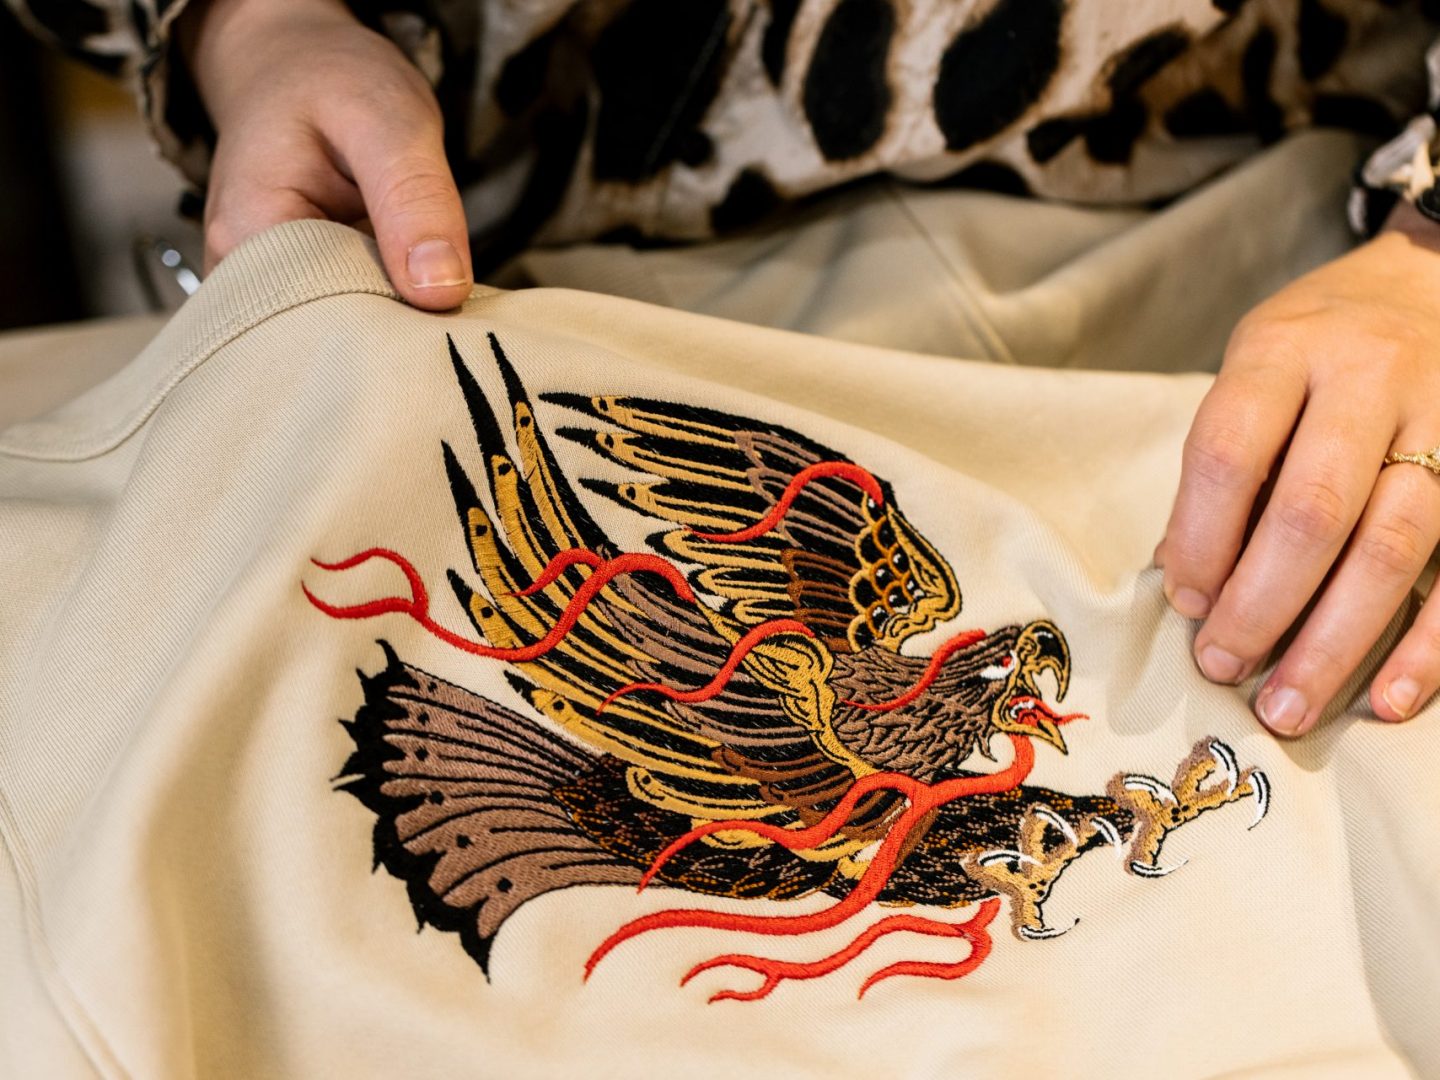 Machine embroidery Service from Hand & Lock